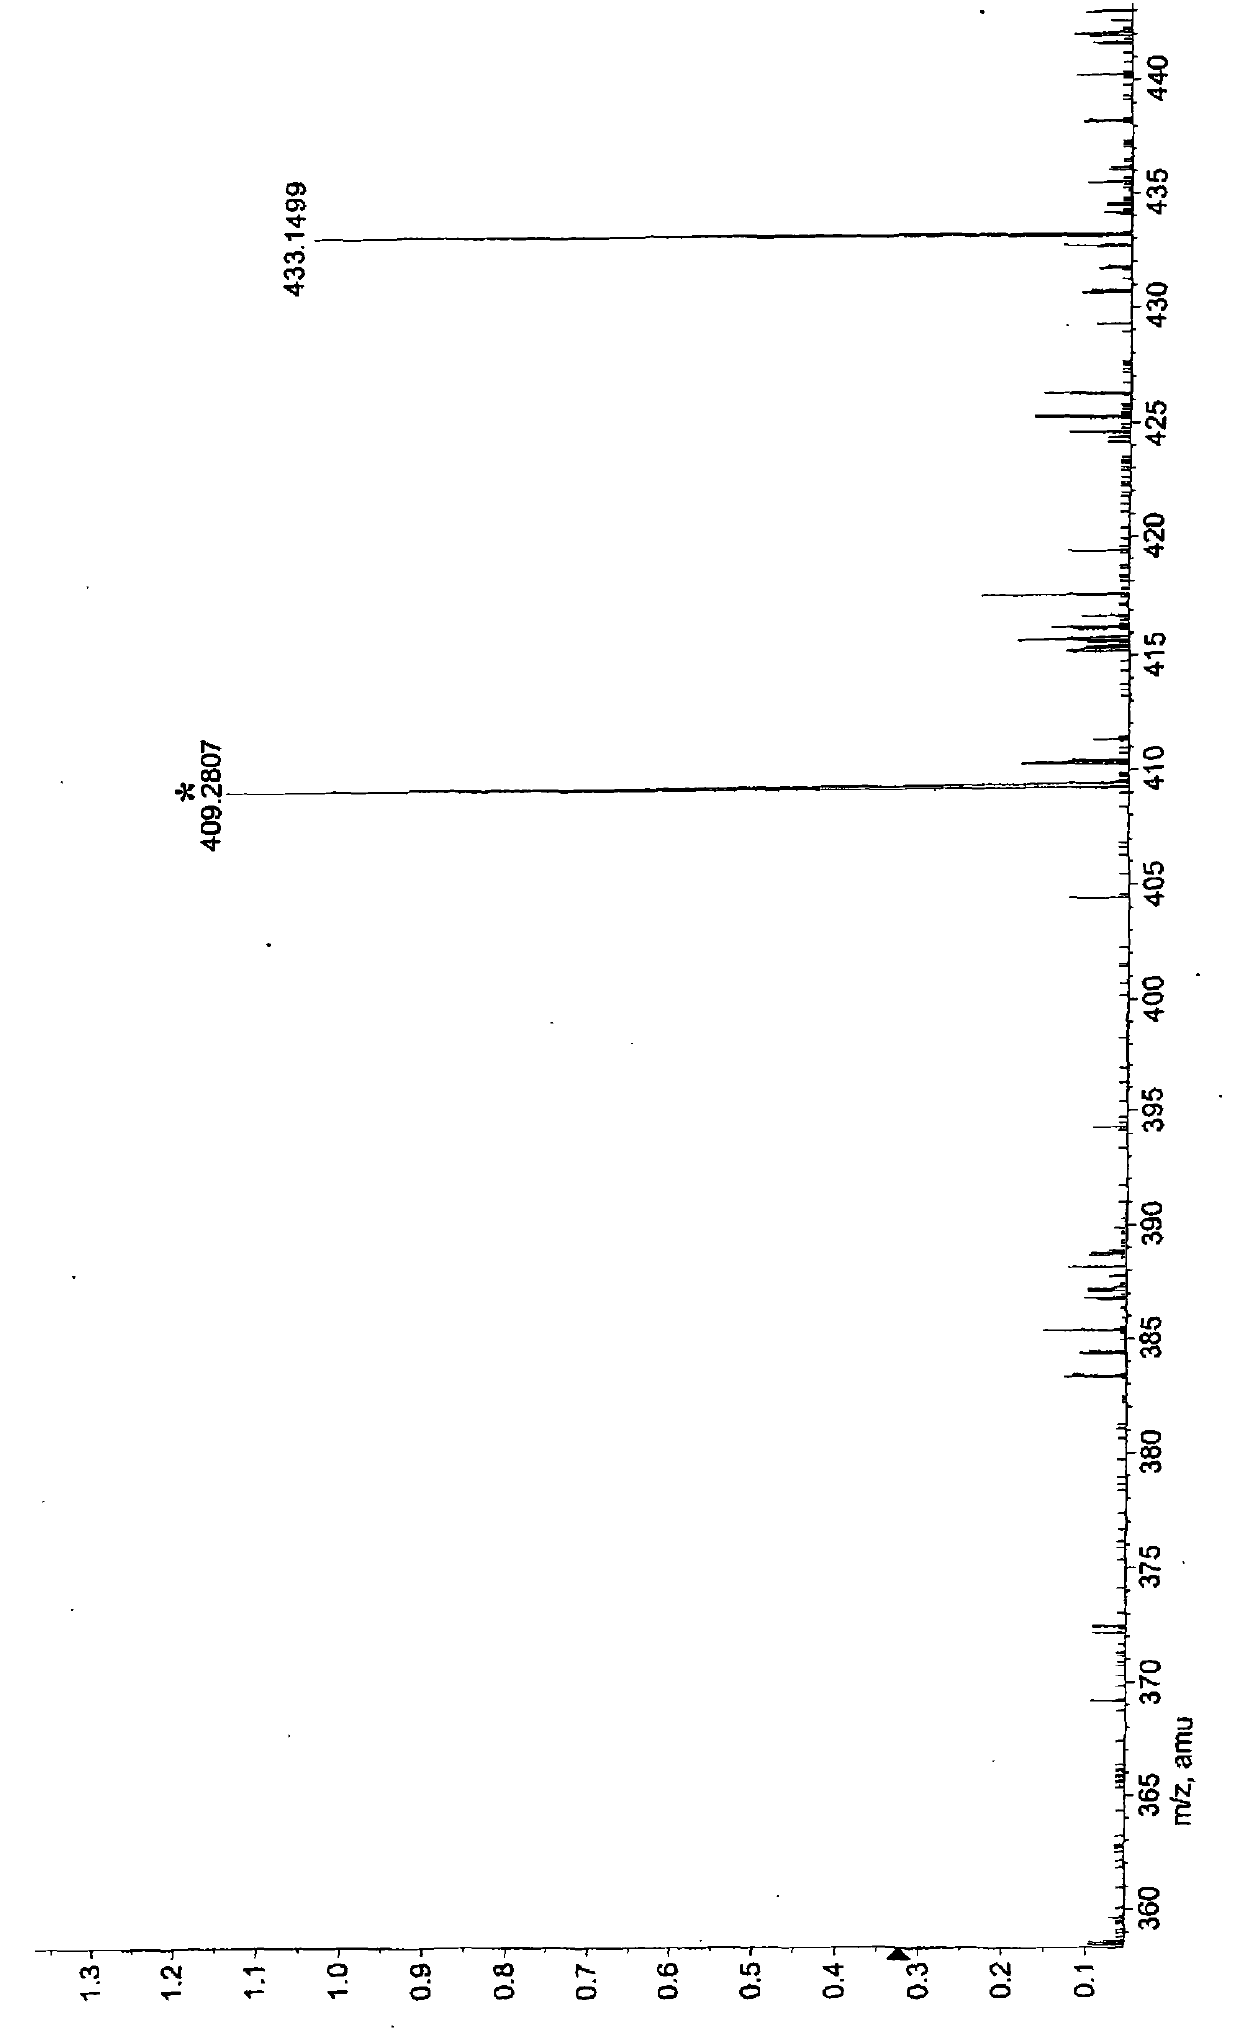 Phenolic compound in tobaccos and preparation method and application thereof